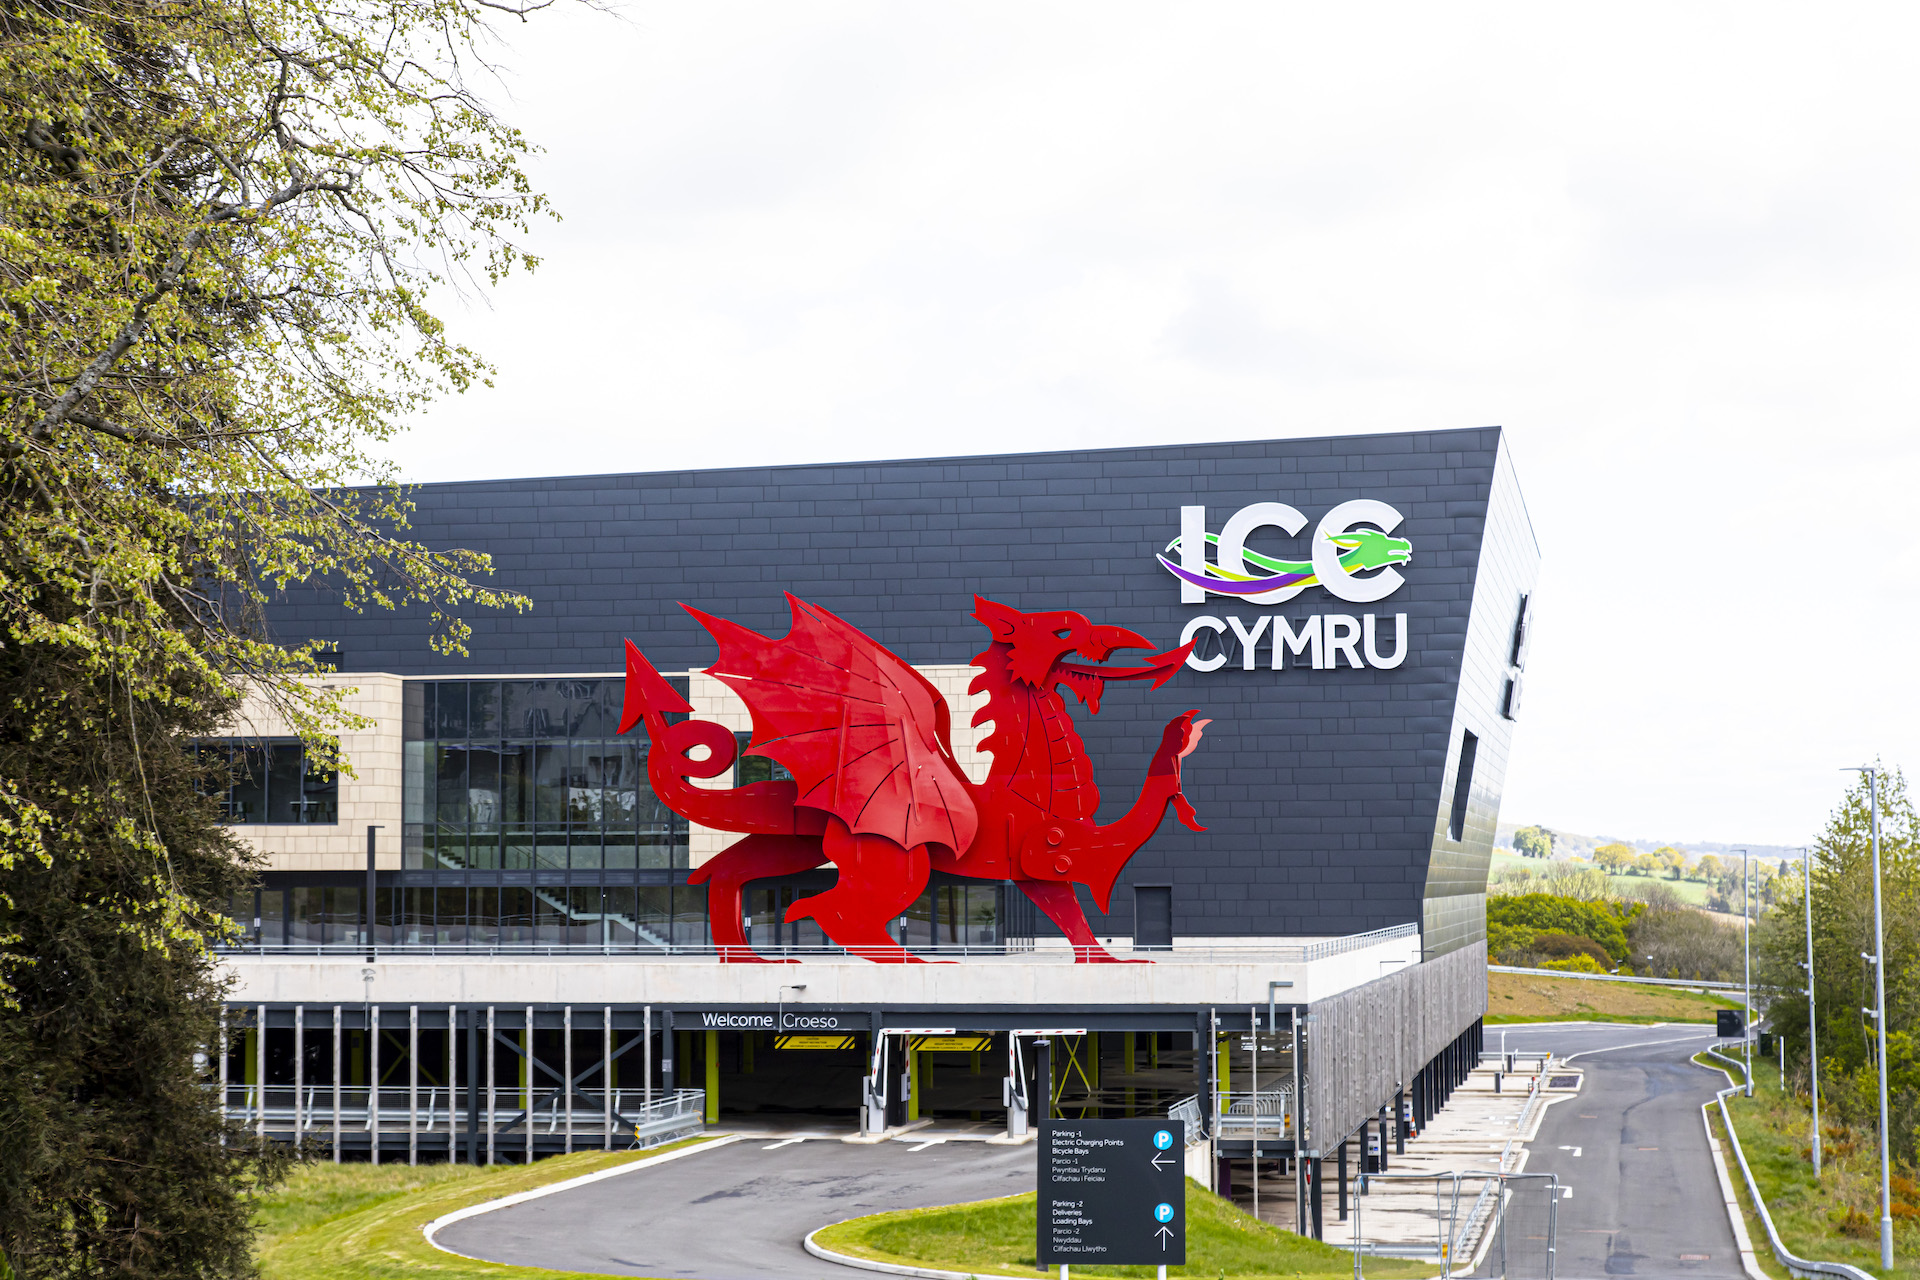 Wales International Conference Centre